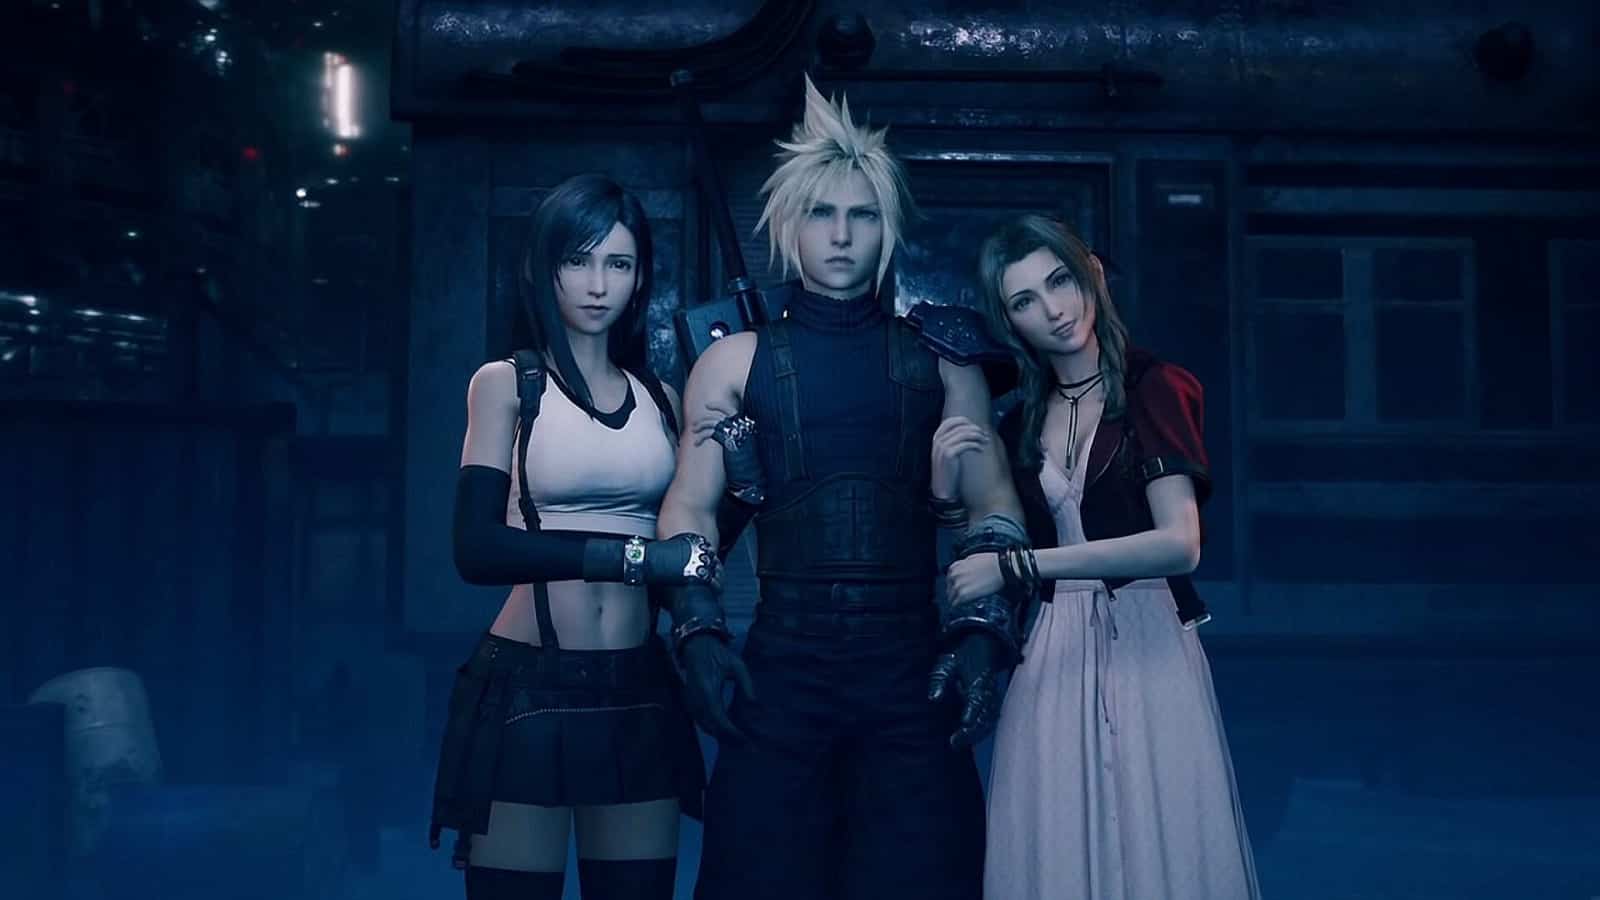 Will Final Fantasy VII Remake come to Xbox? New image excite fans